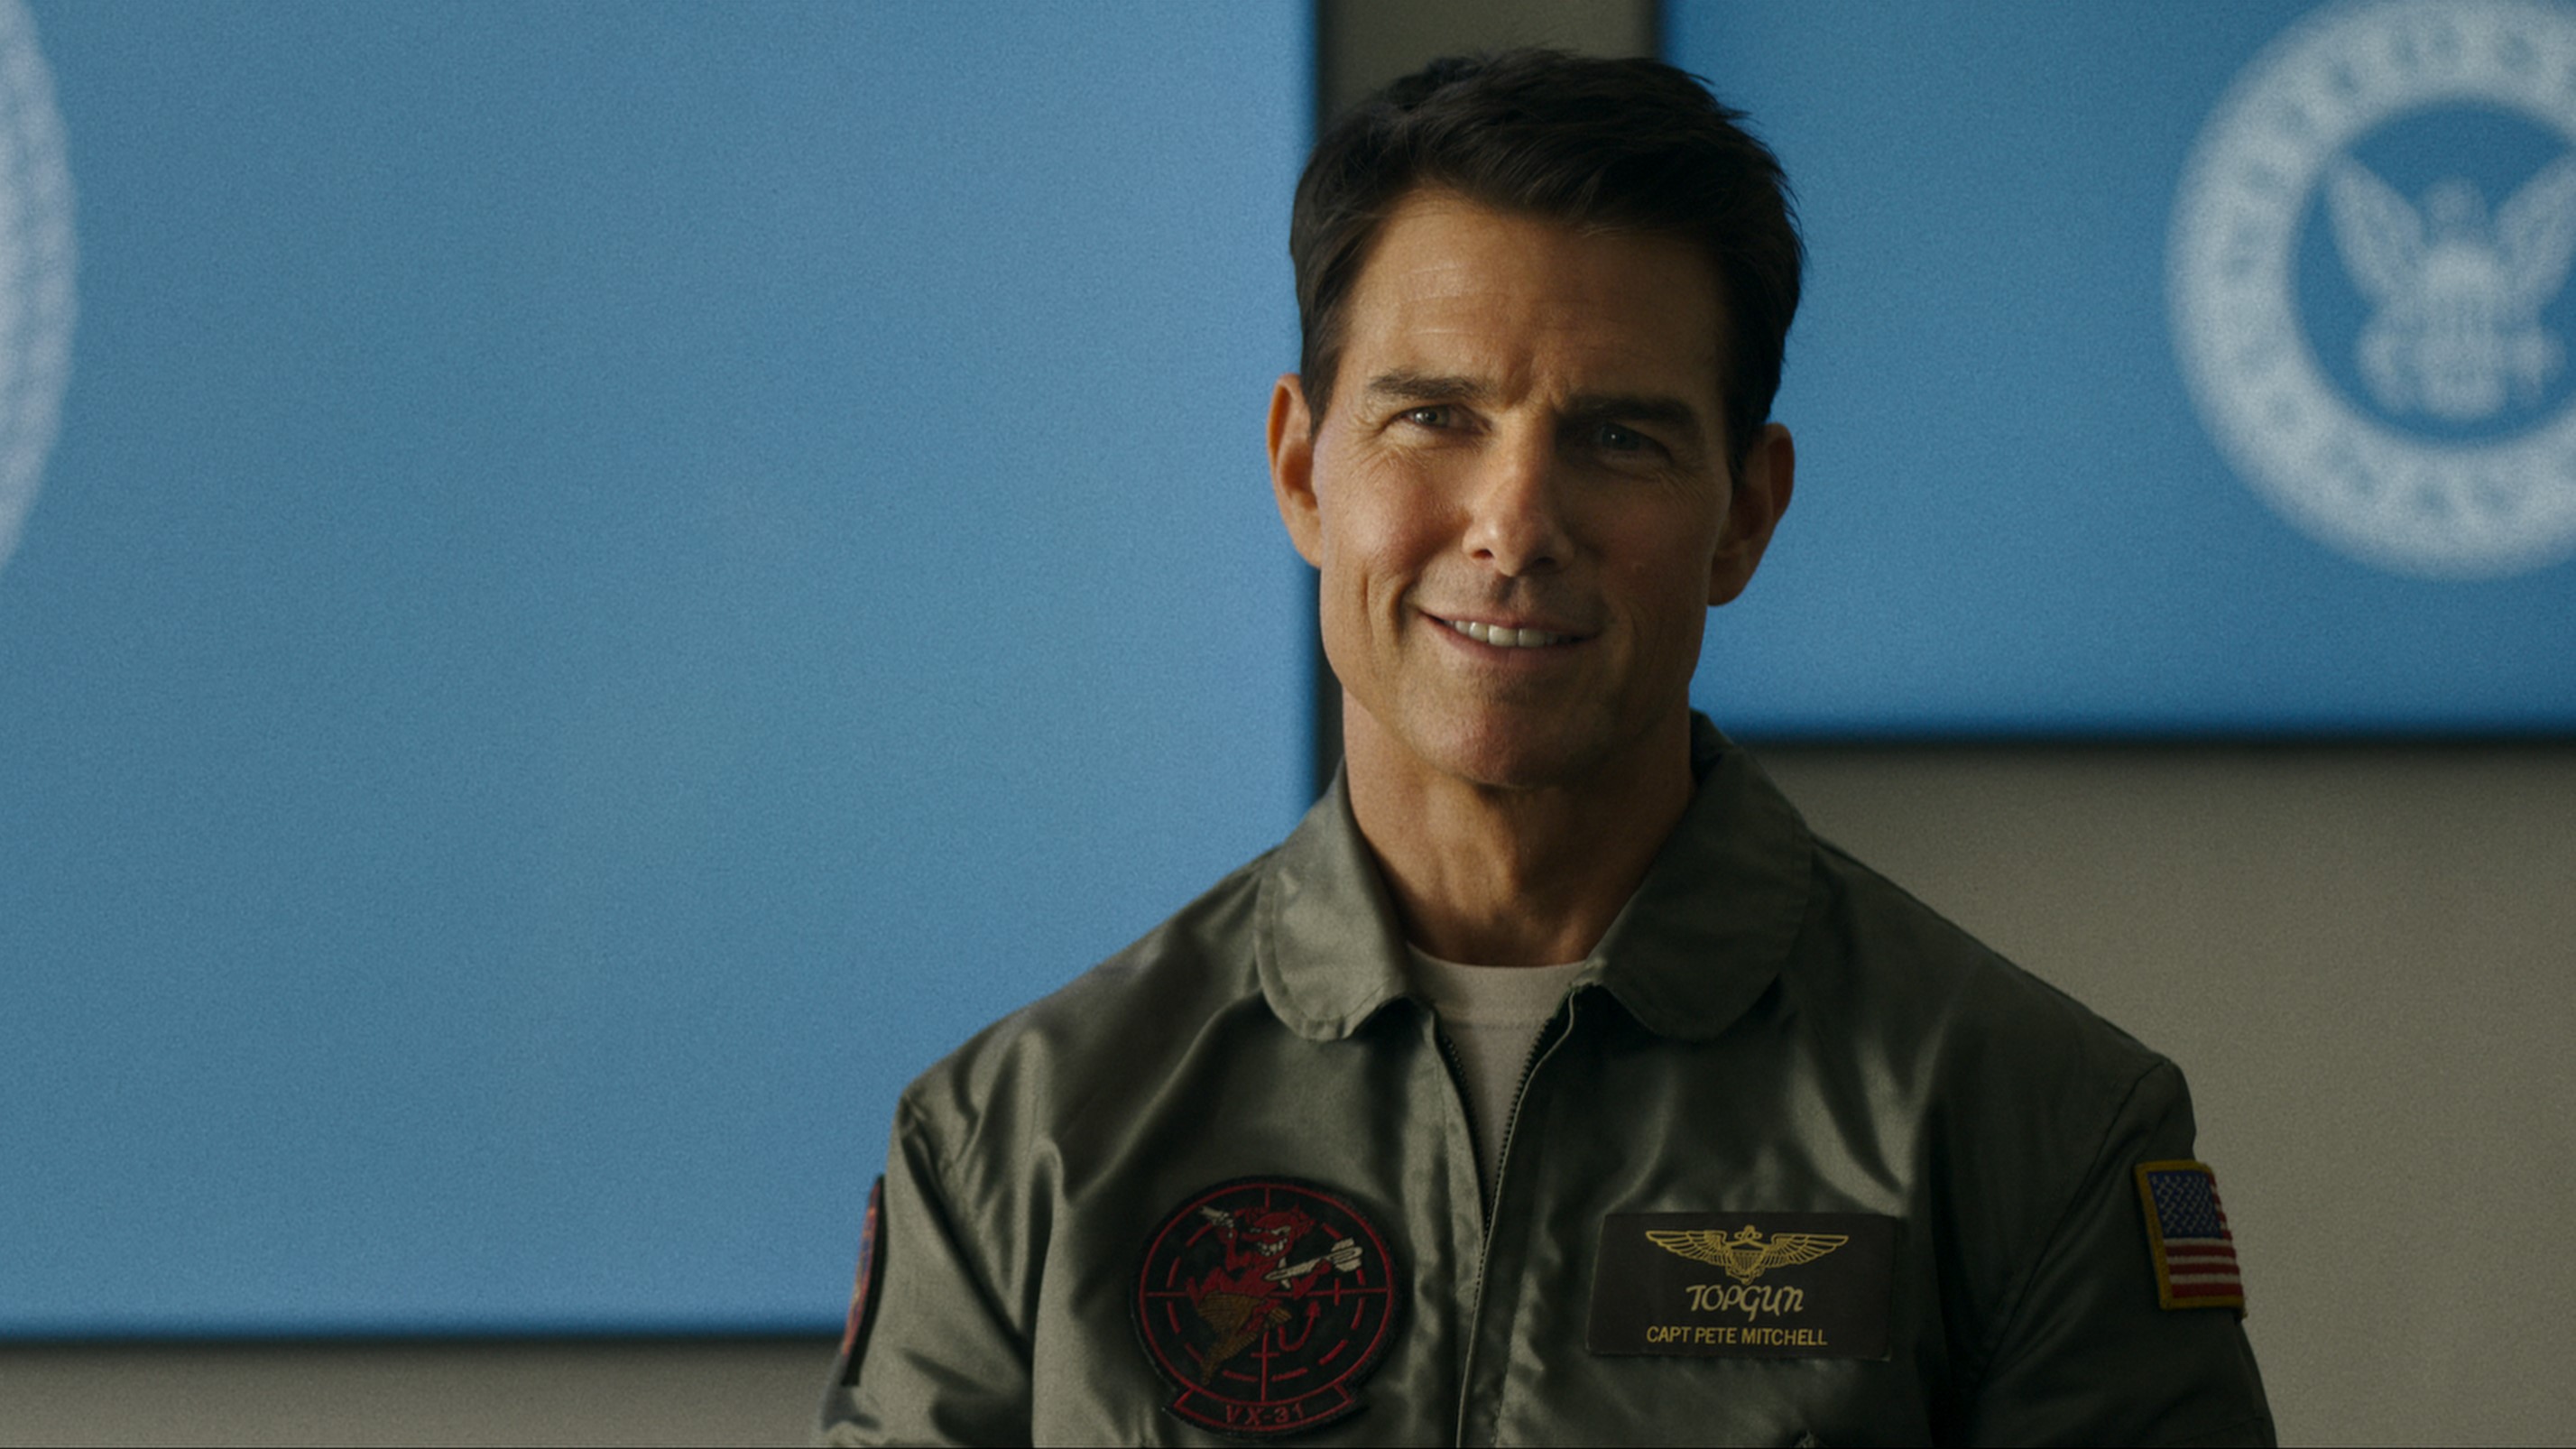 Top Gun 2: Here is when Top Gun Maverick is released on BluRay, 4K, digital  and streaming